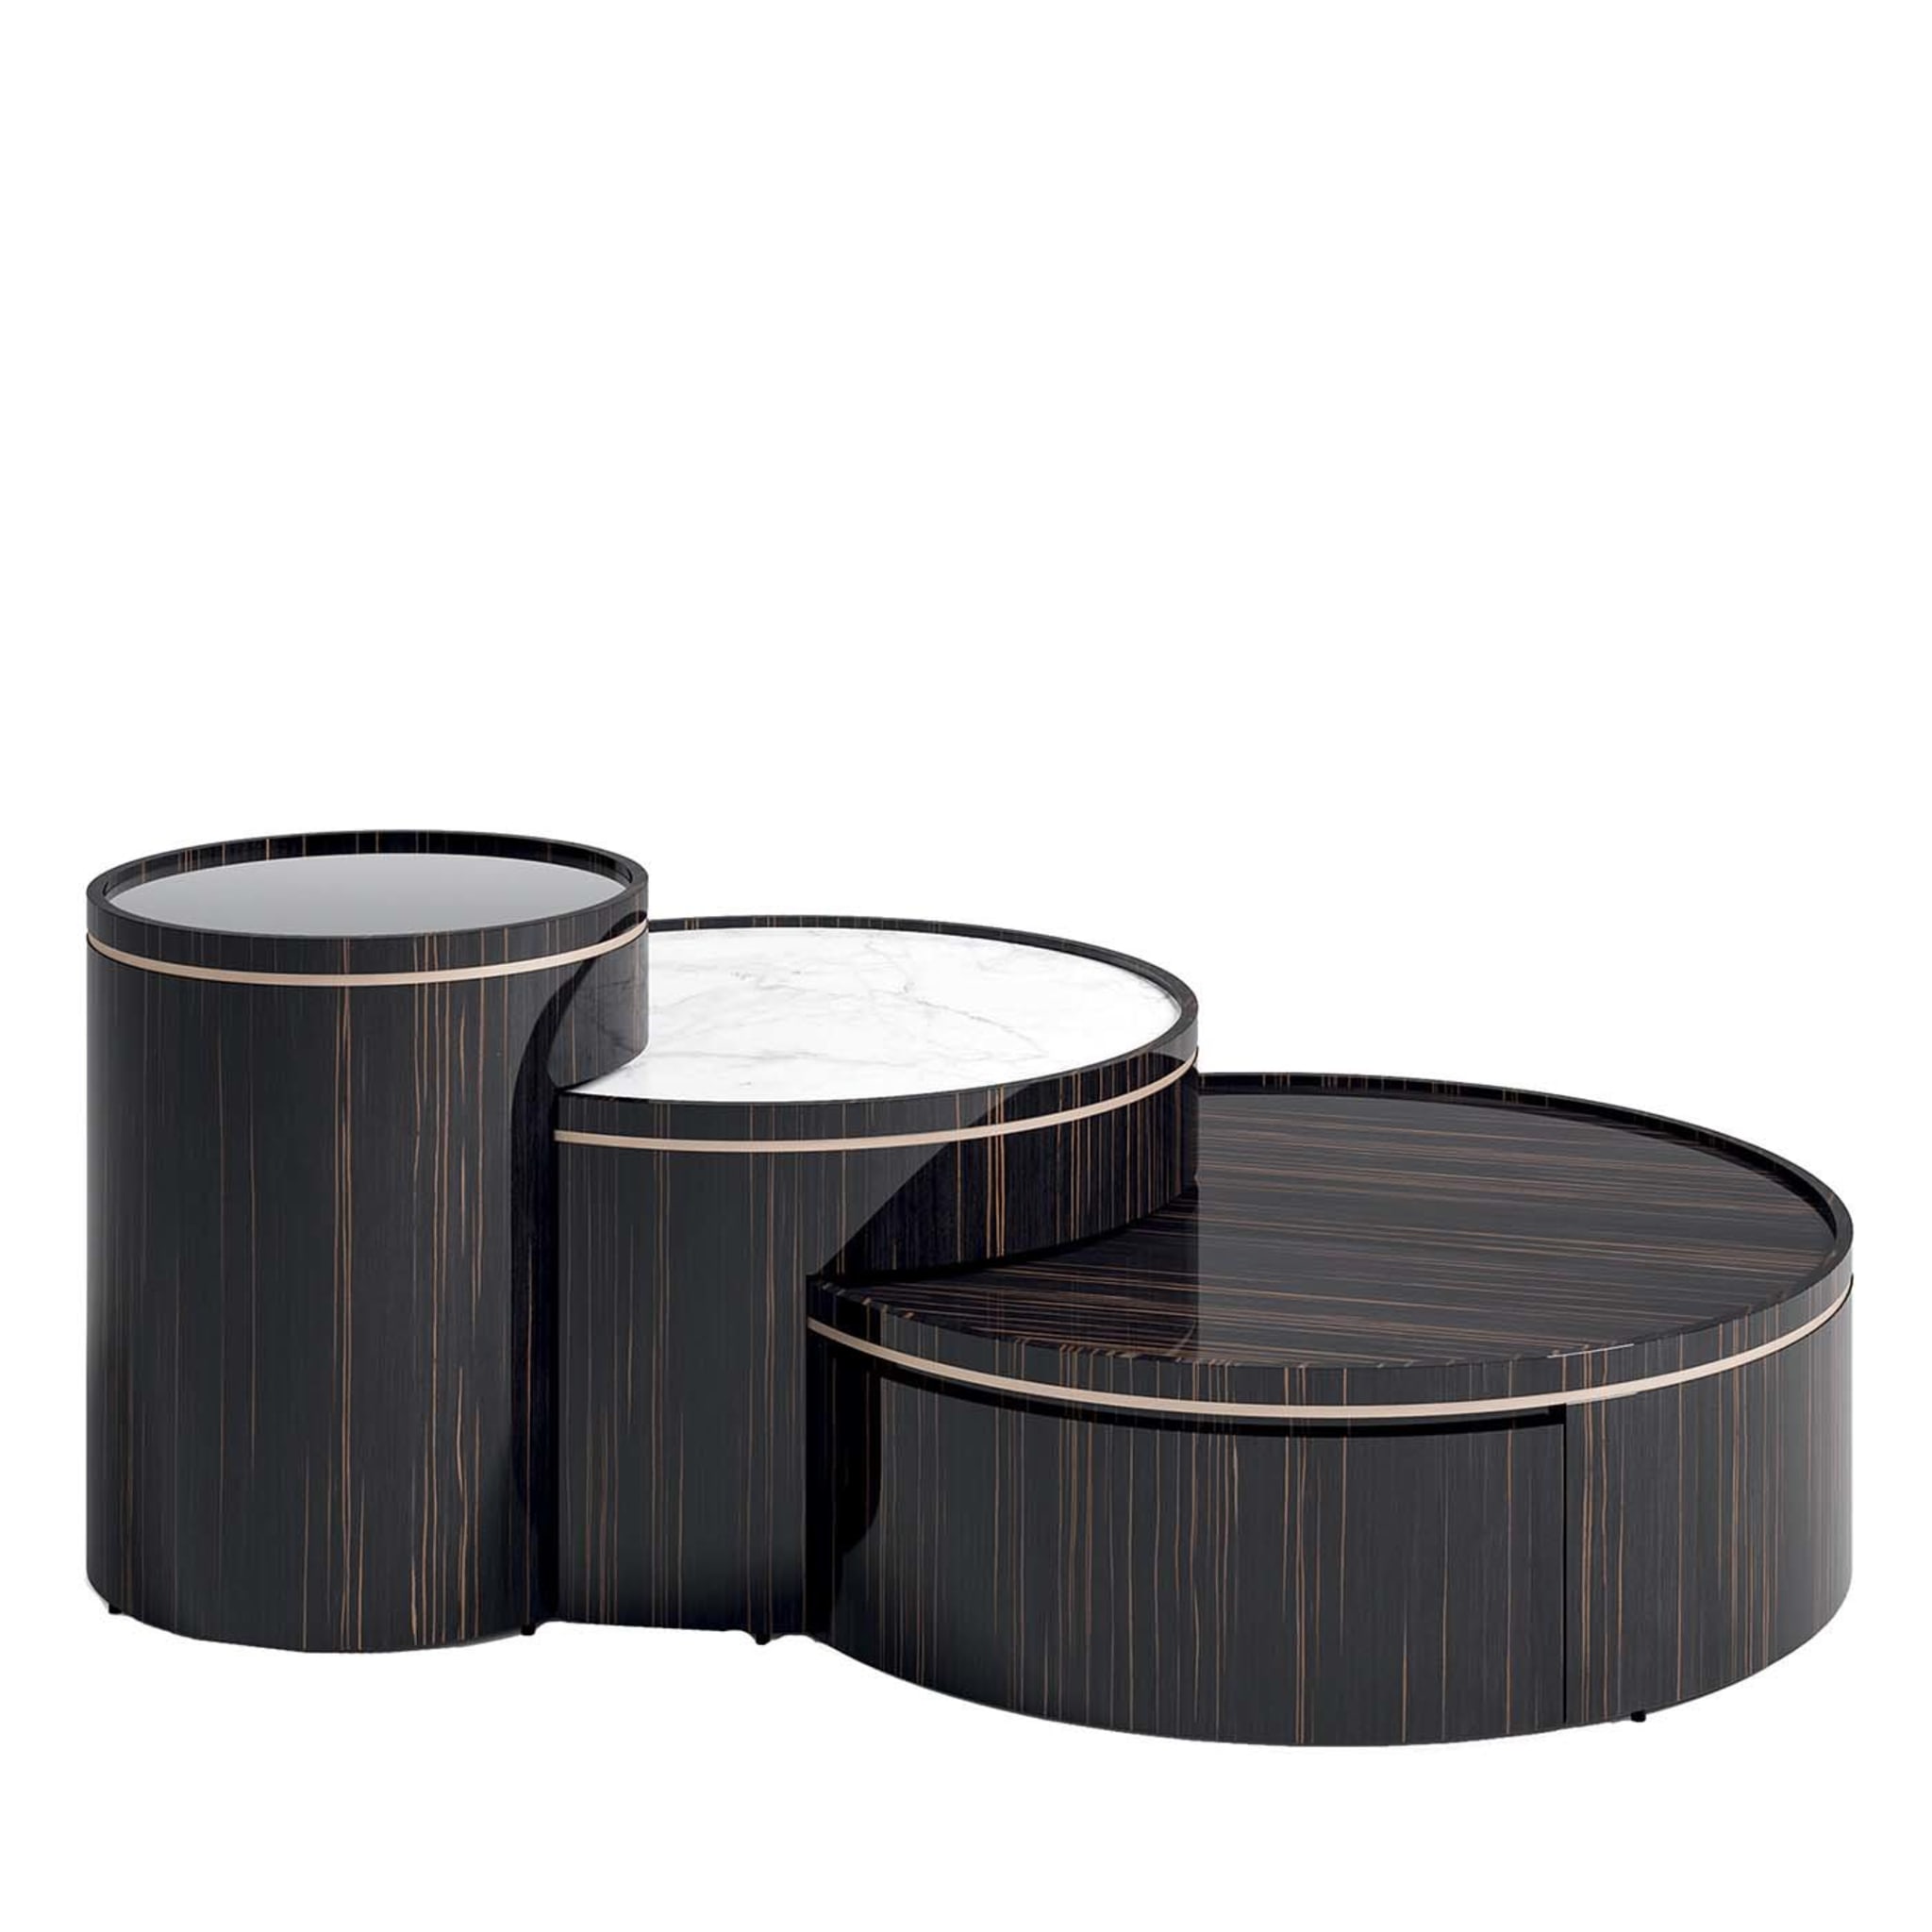 3 in 1 Coffee Table in Ebony - Main view